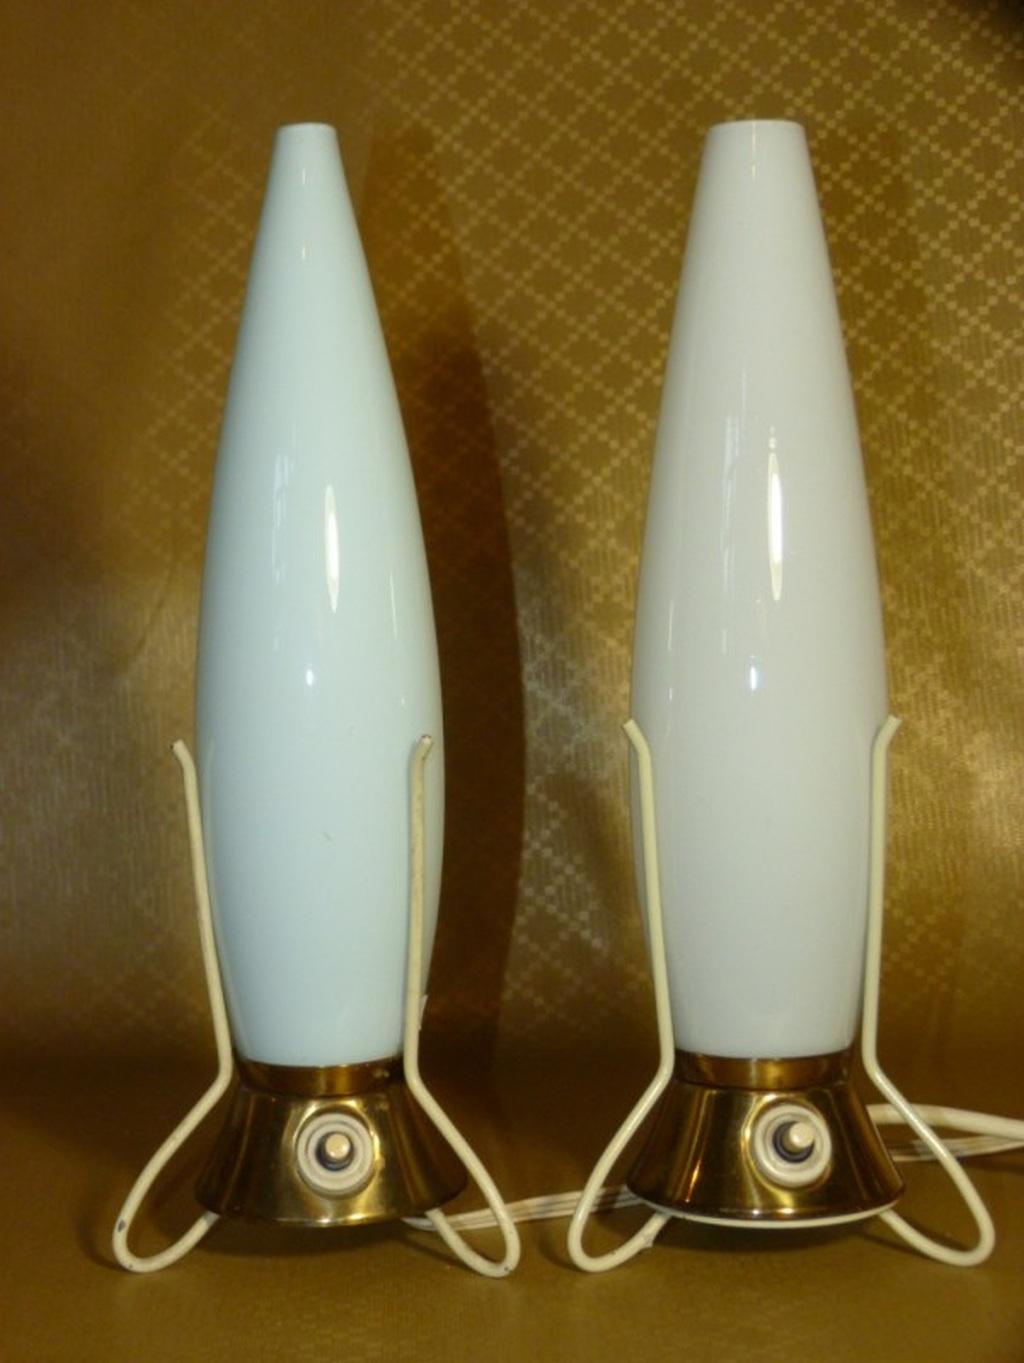 Vintage Space Age Rocket bedside table Lamp by Leoš Nikel Zukov, 1950s. Two types of lampshades matte and glossy.